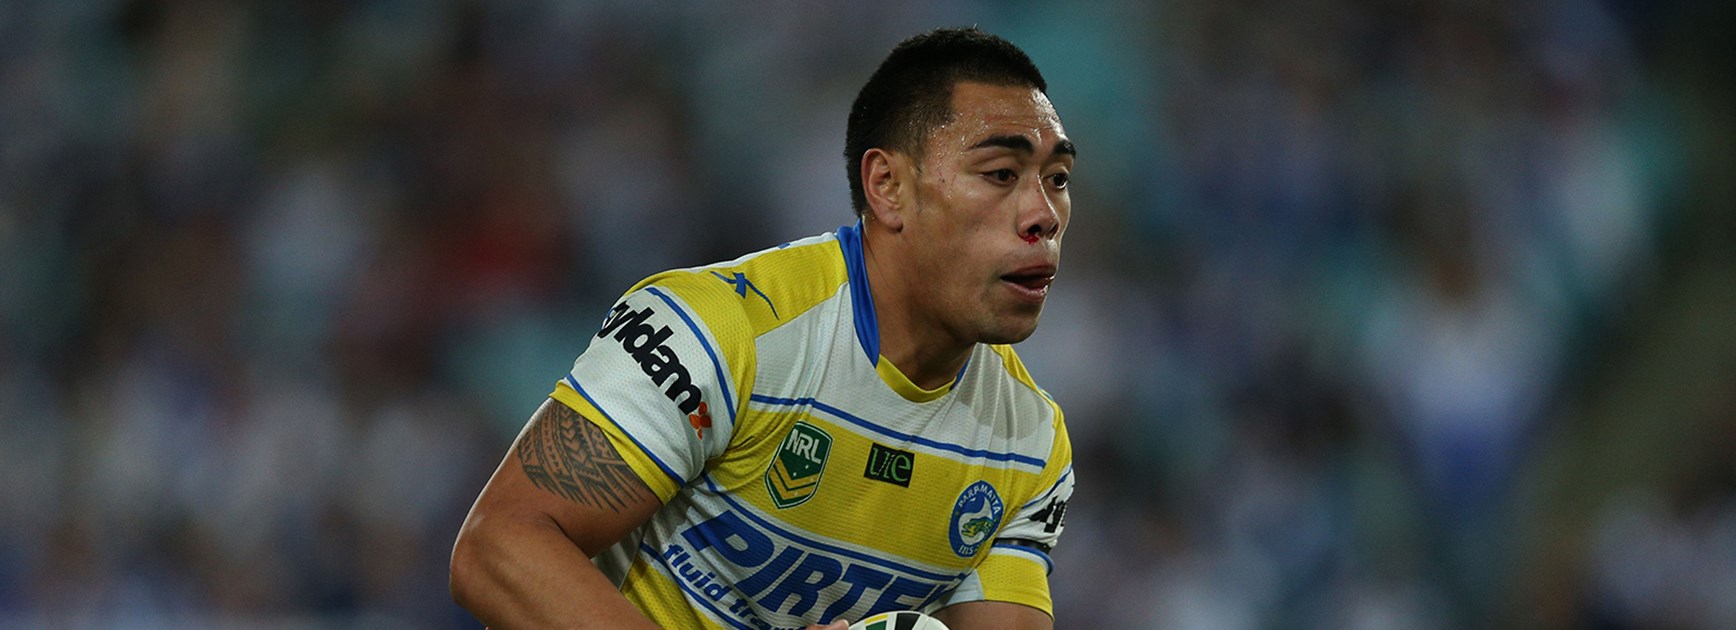 Former Parramatta Eels back Ken Sio has signed with Newcastle Knights after a stint in the Super League.